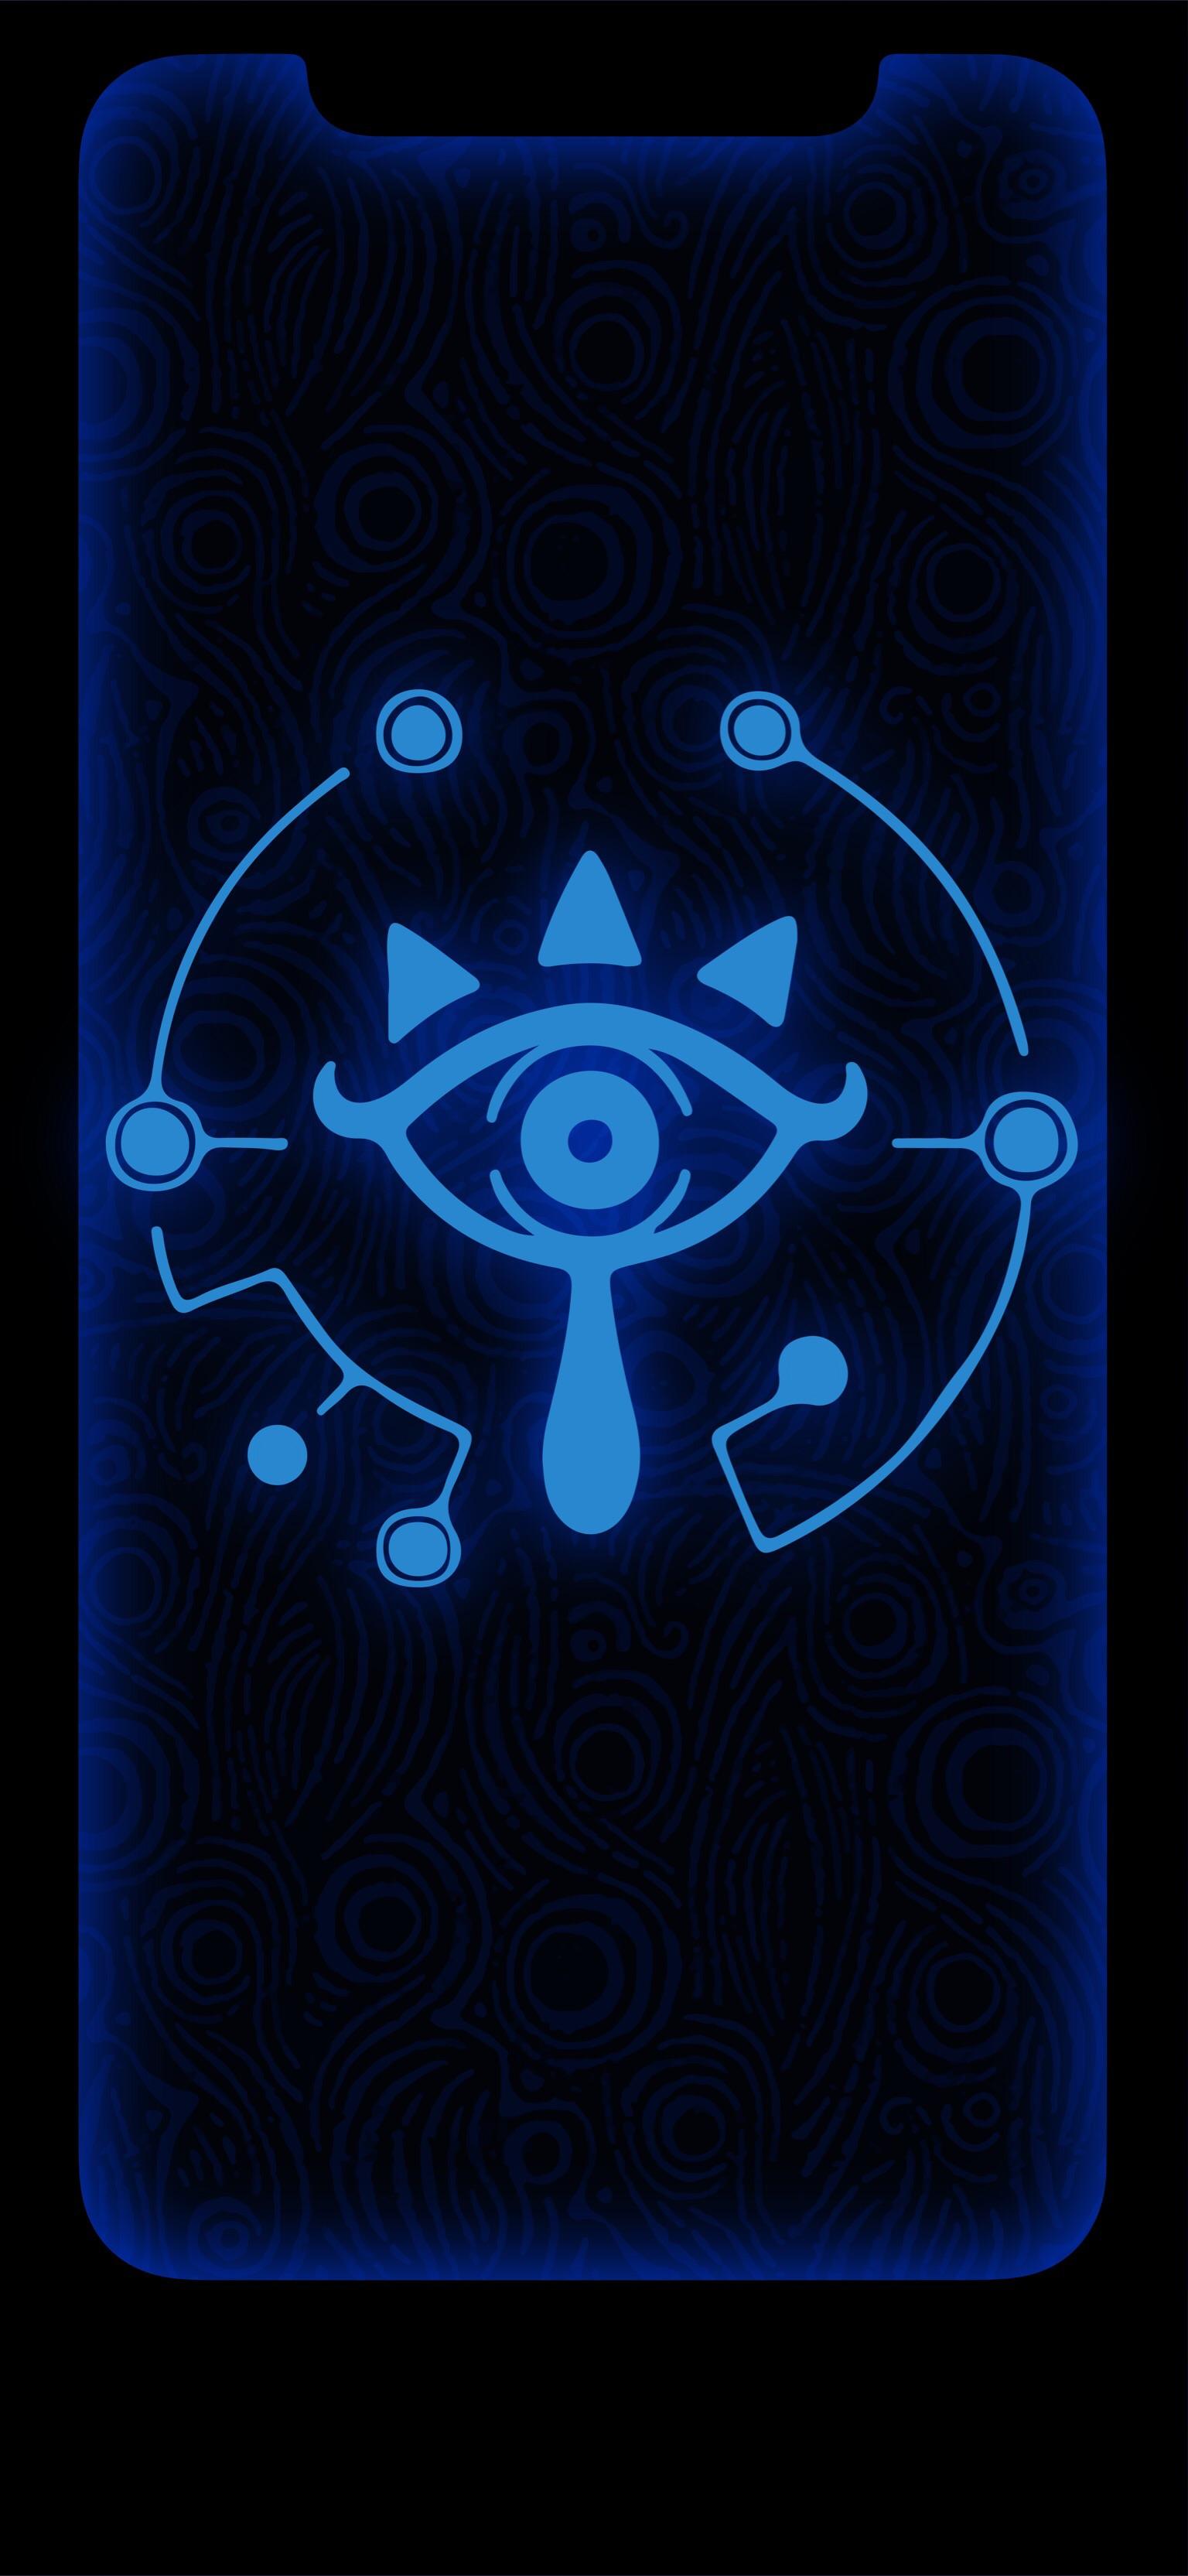 Made a sheikah slate wallpapers for iPhone X : Breath_of_the_Wild